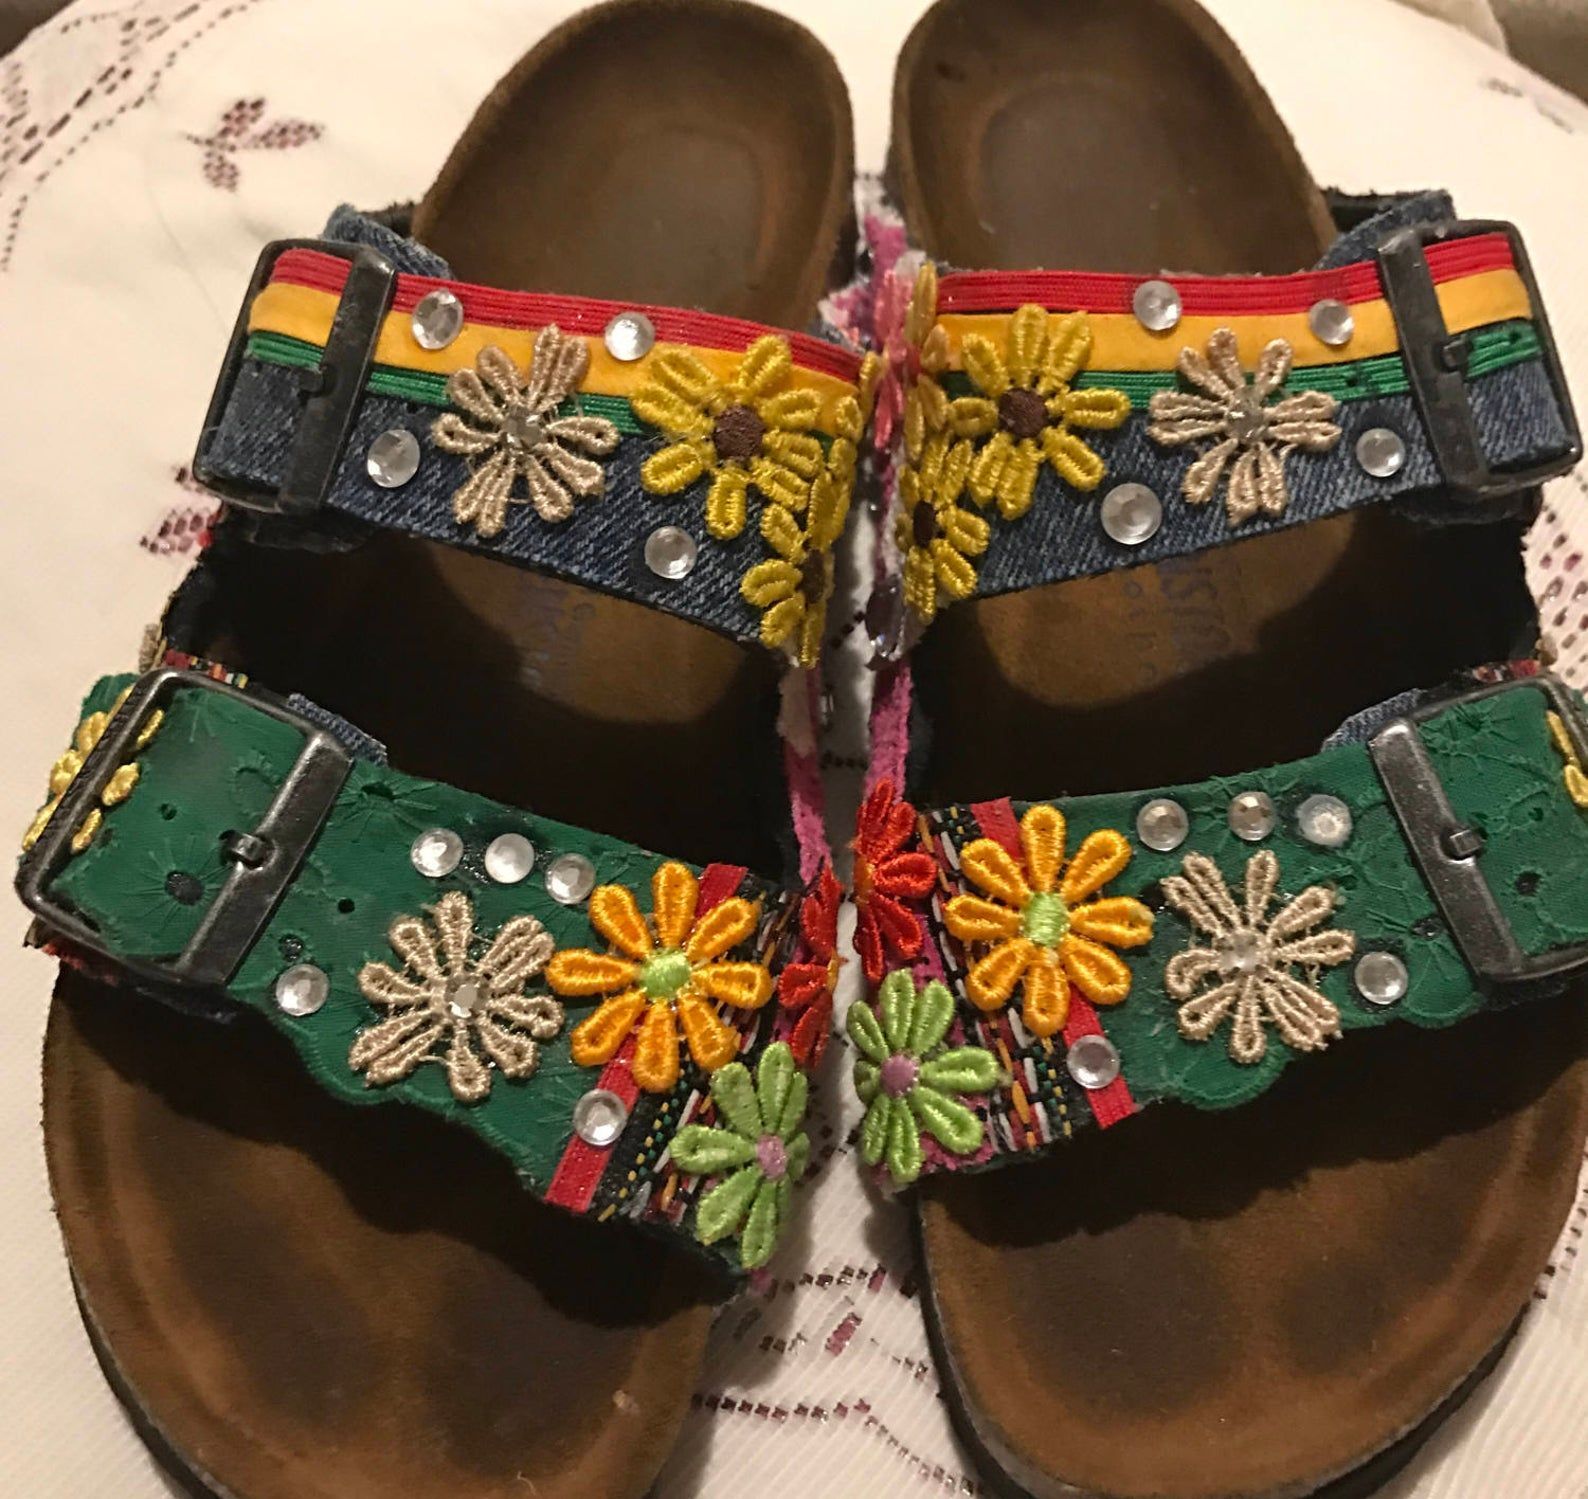 Hippie Birkenstocks  Custom Made to order Any Size/color/combination -   15 DIY Clothes Hipster hippie ideas